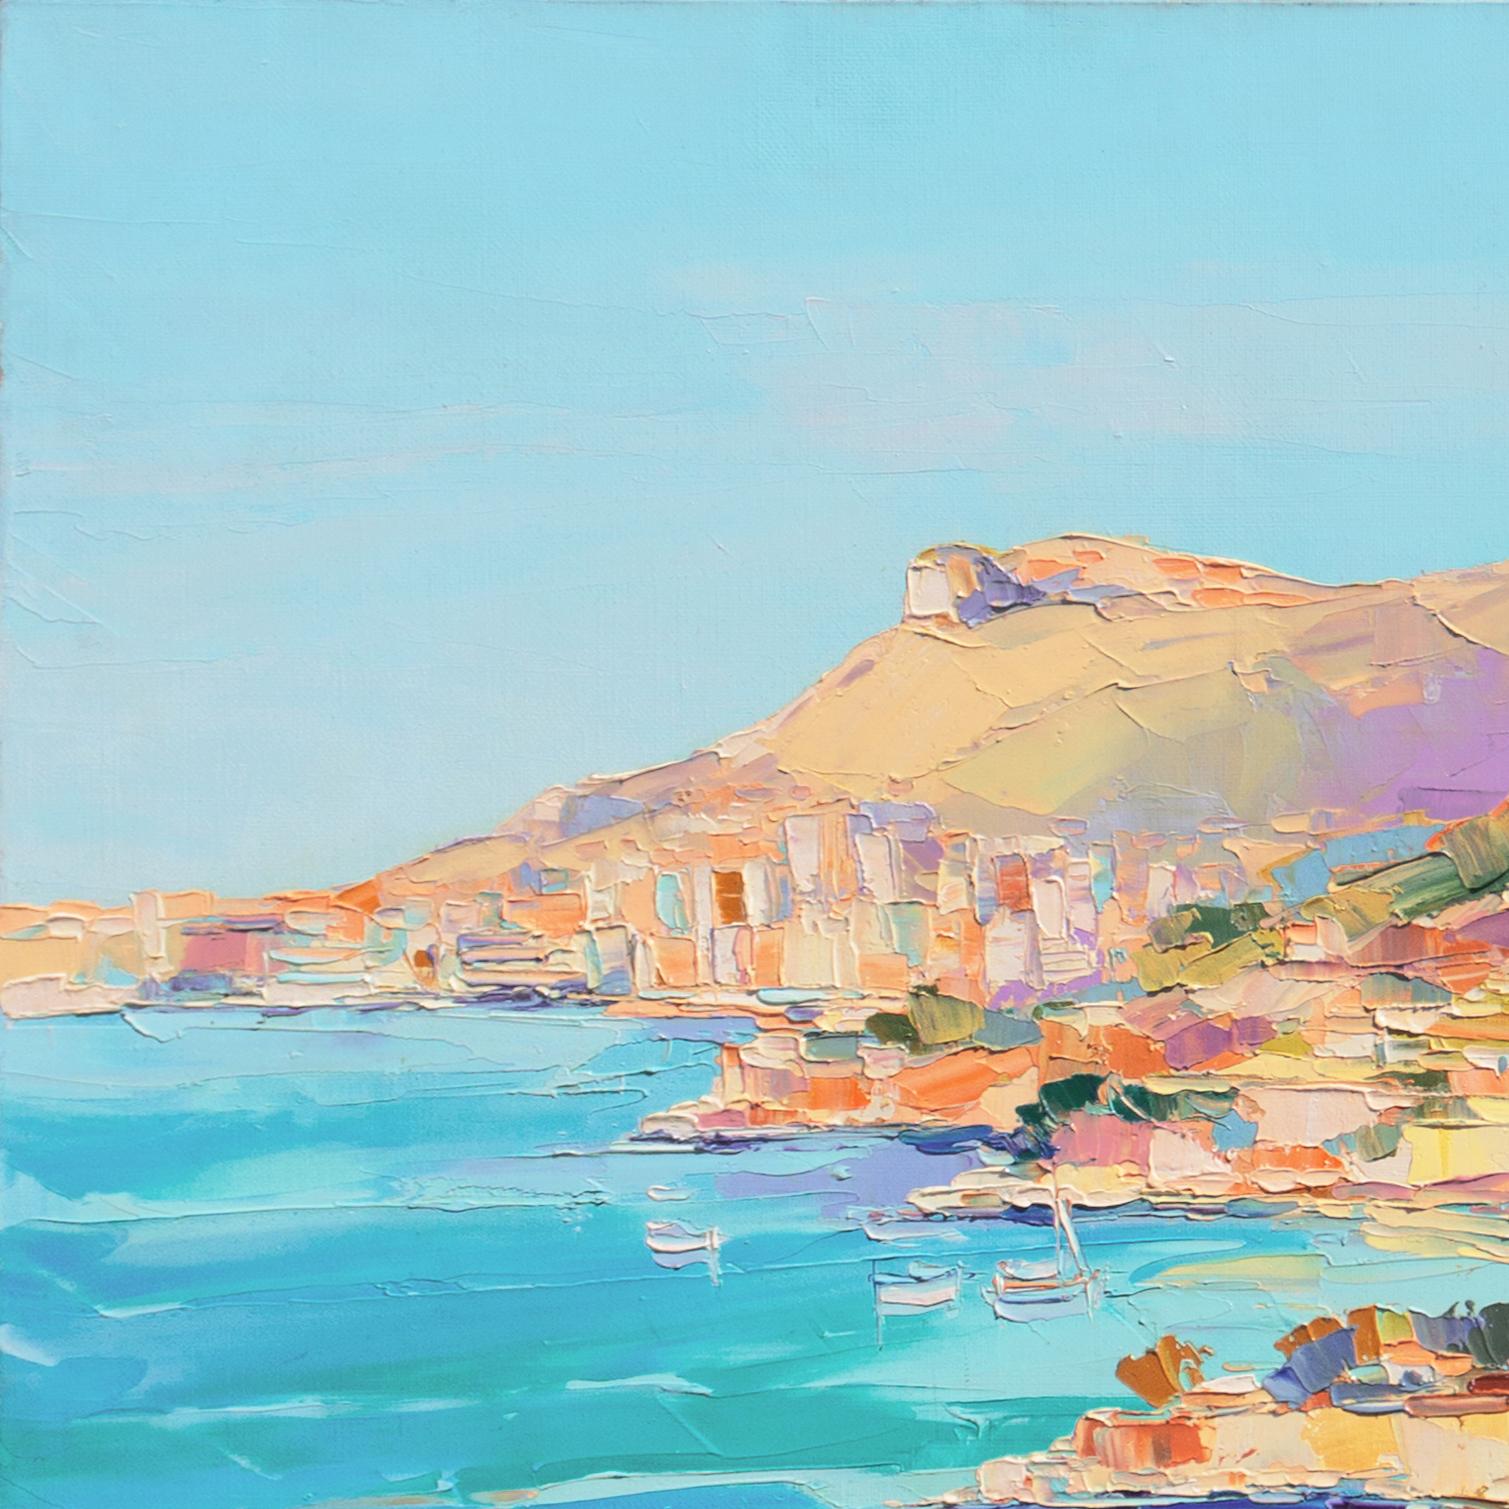 Signed lower right, 'Demarte' for Alain Demarte (French, 1944-2015) and painted circa 2005. Additionally signed, verso, and titled, 'Plage Golfe Bleu, Roquebrune.'

A bright and colorful, birds-eye view of this popular sandy beach in Roquebrune,